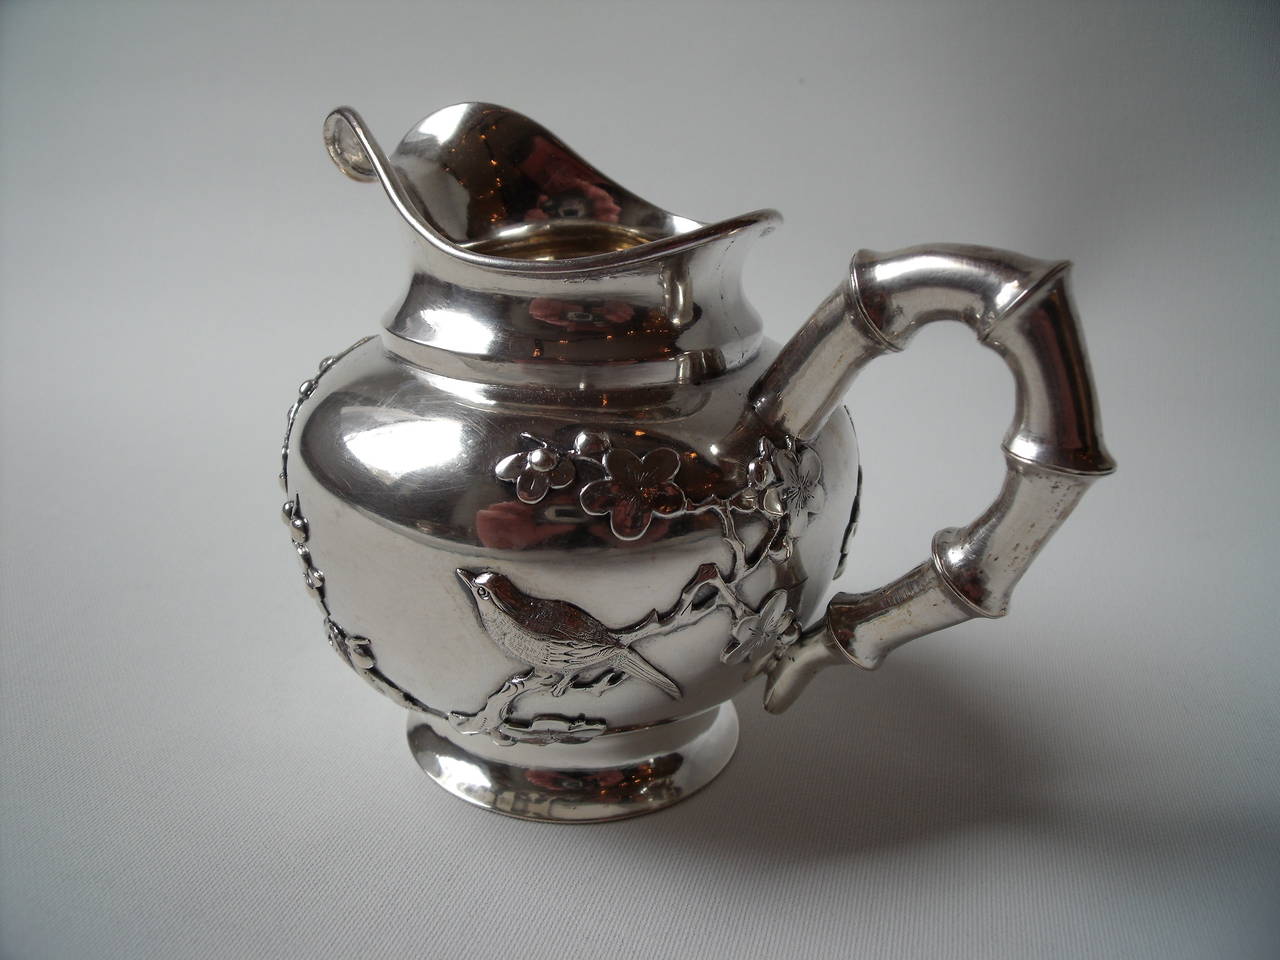 Japanese Art Nouveau Style Silver Tea and Coffee Set Floral Decorated with Birds For Sale 1